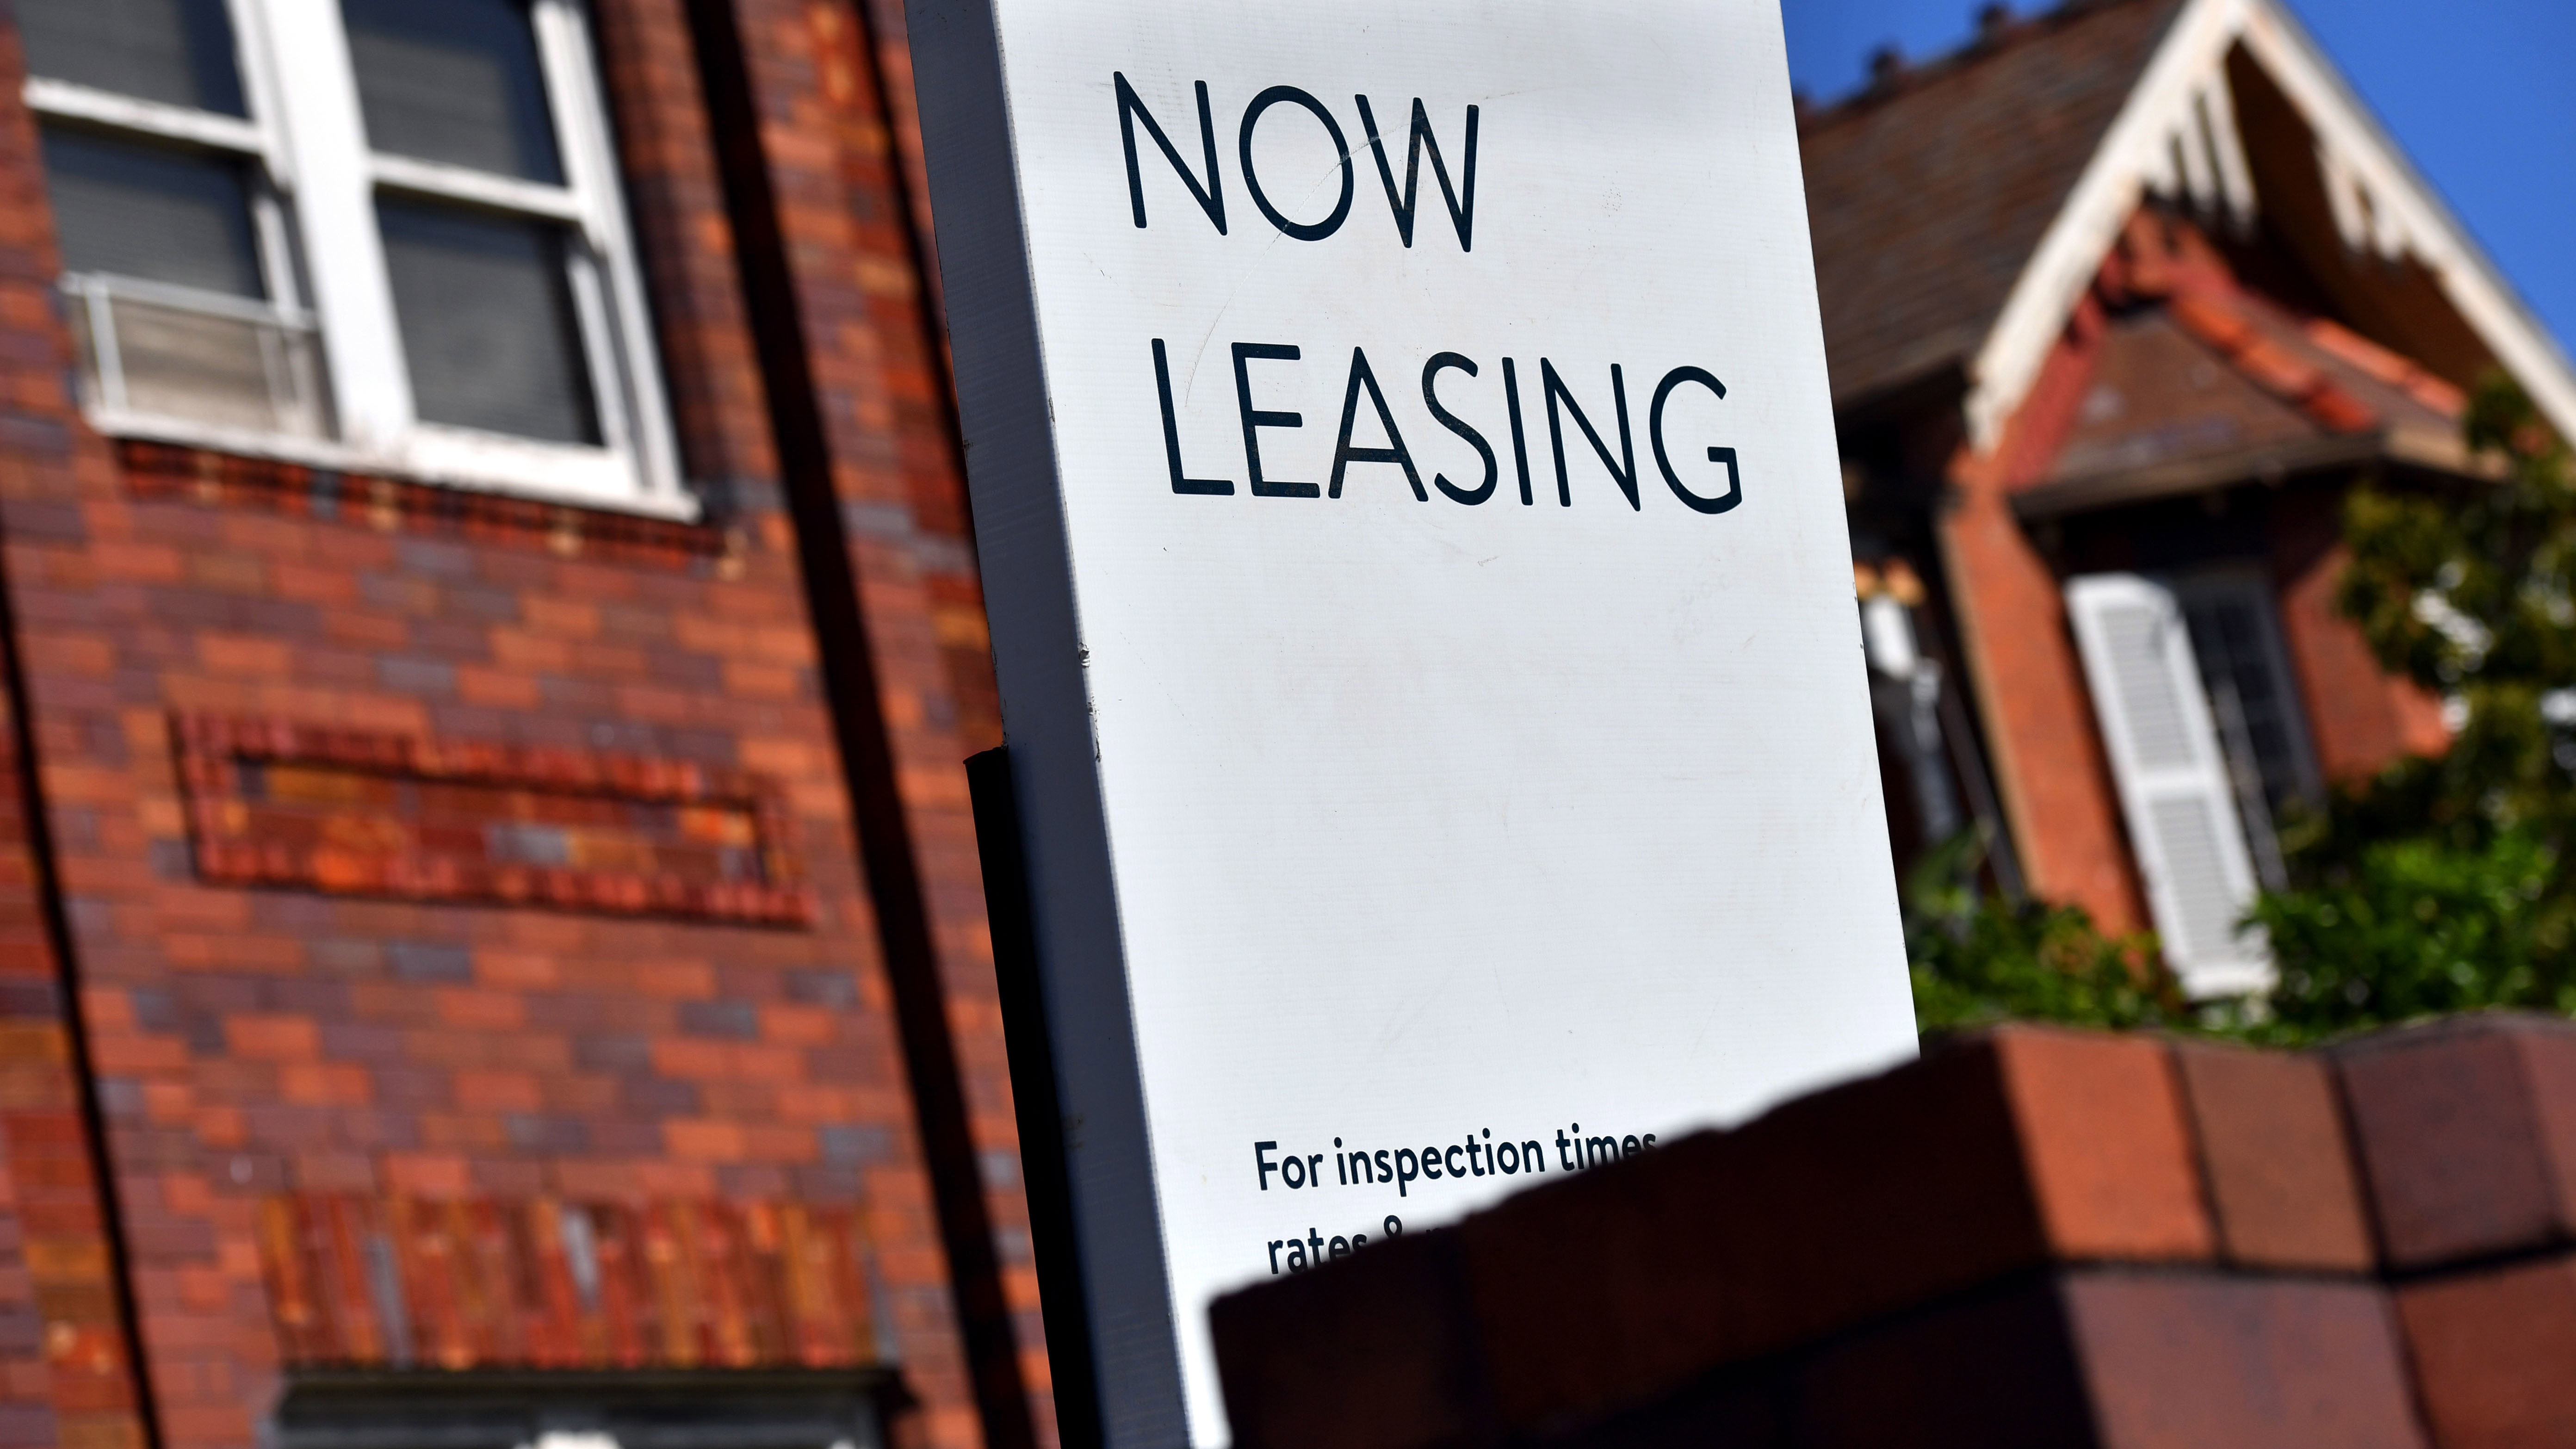 A "now leasing" sign at a property listed for rent in Sydney.